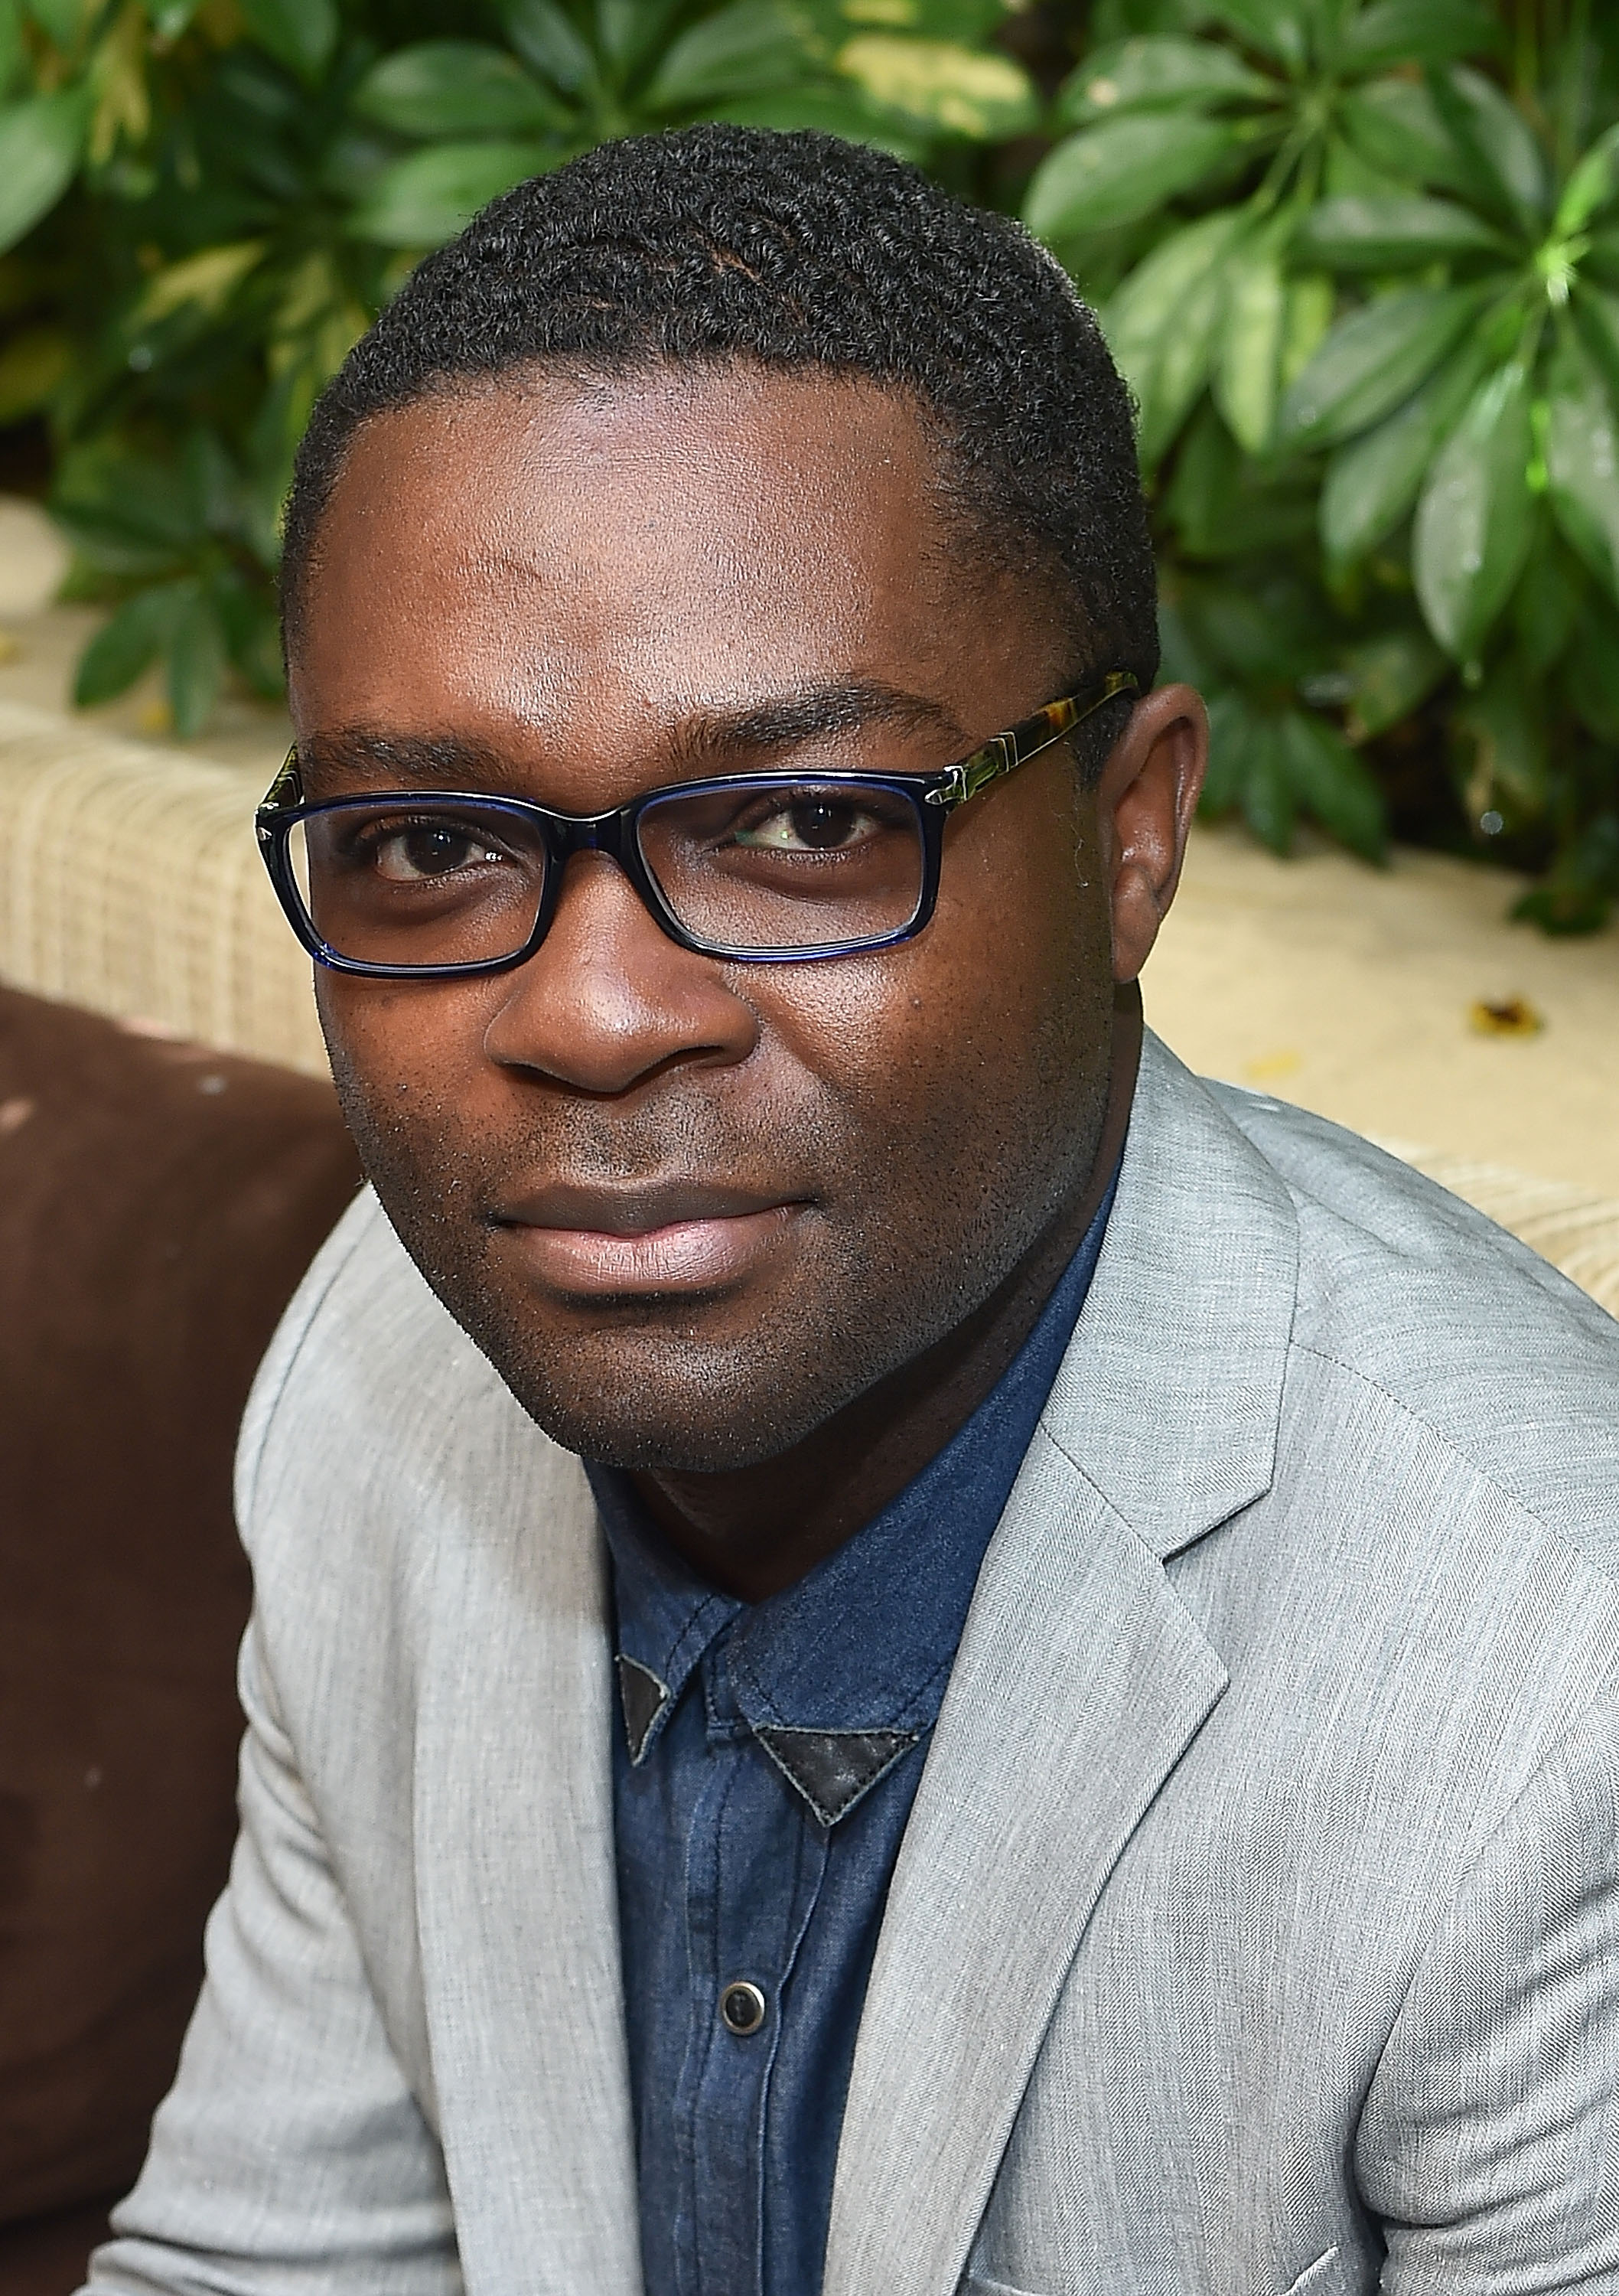 David Oyelowo attends the Variety Purpose Summit in Los Angeles, Calif. on June 25, 2015.